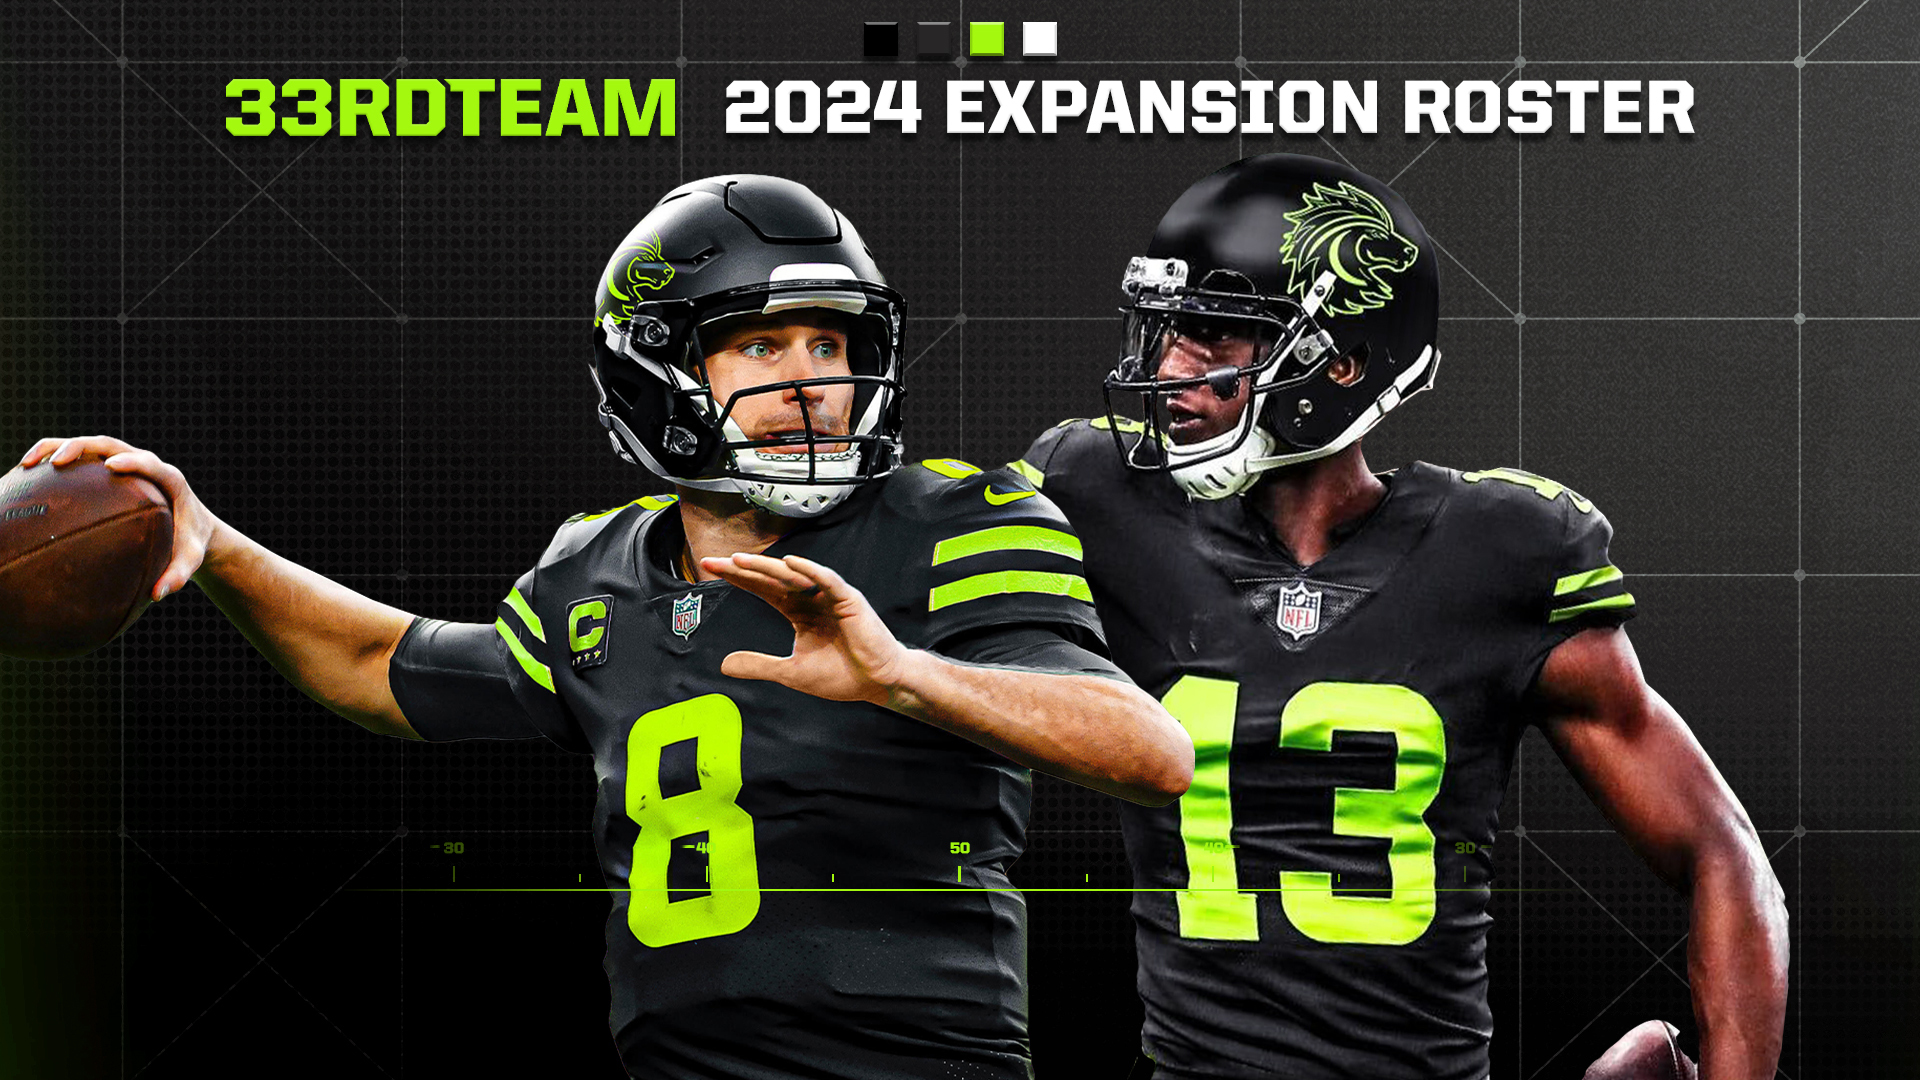 The 33rd Team’s Expansion Roster: What a 2024 Team Could Look Like